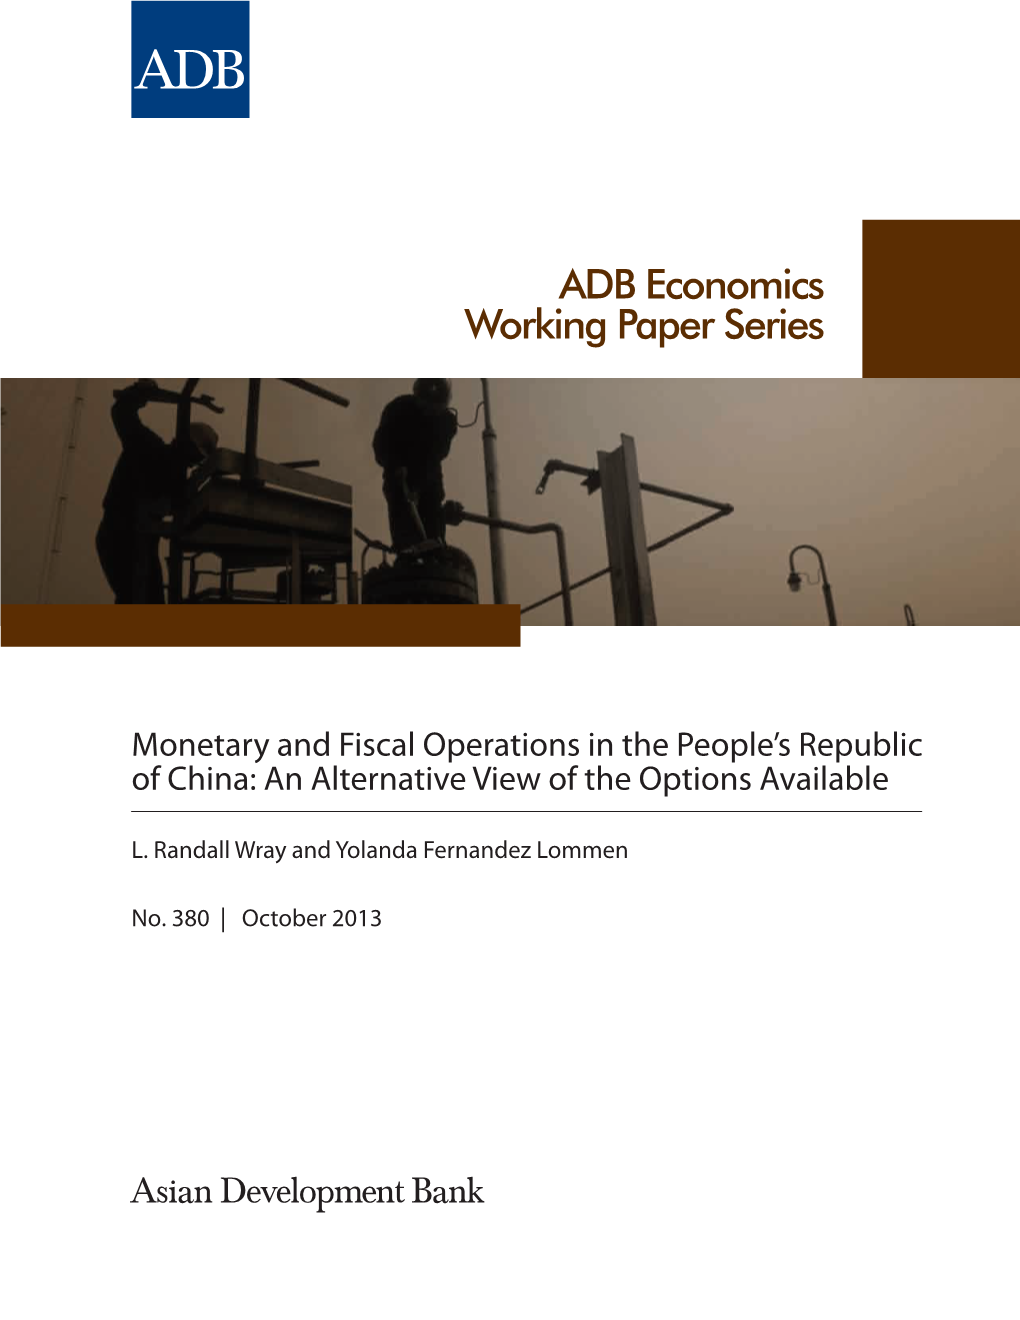 Monetary and Fiscal Operations in the People's Republic of China: an Alternative View of the Options Available